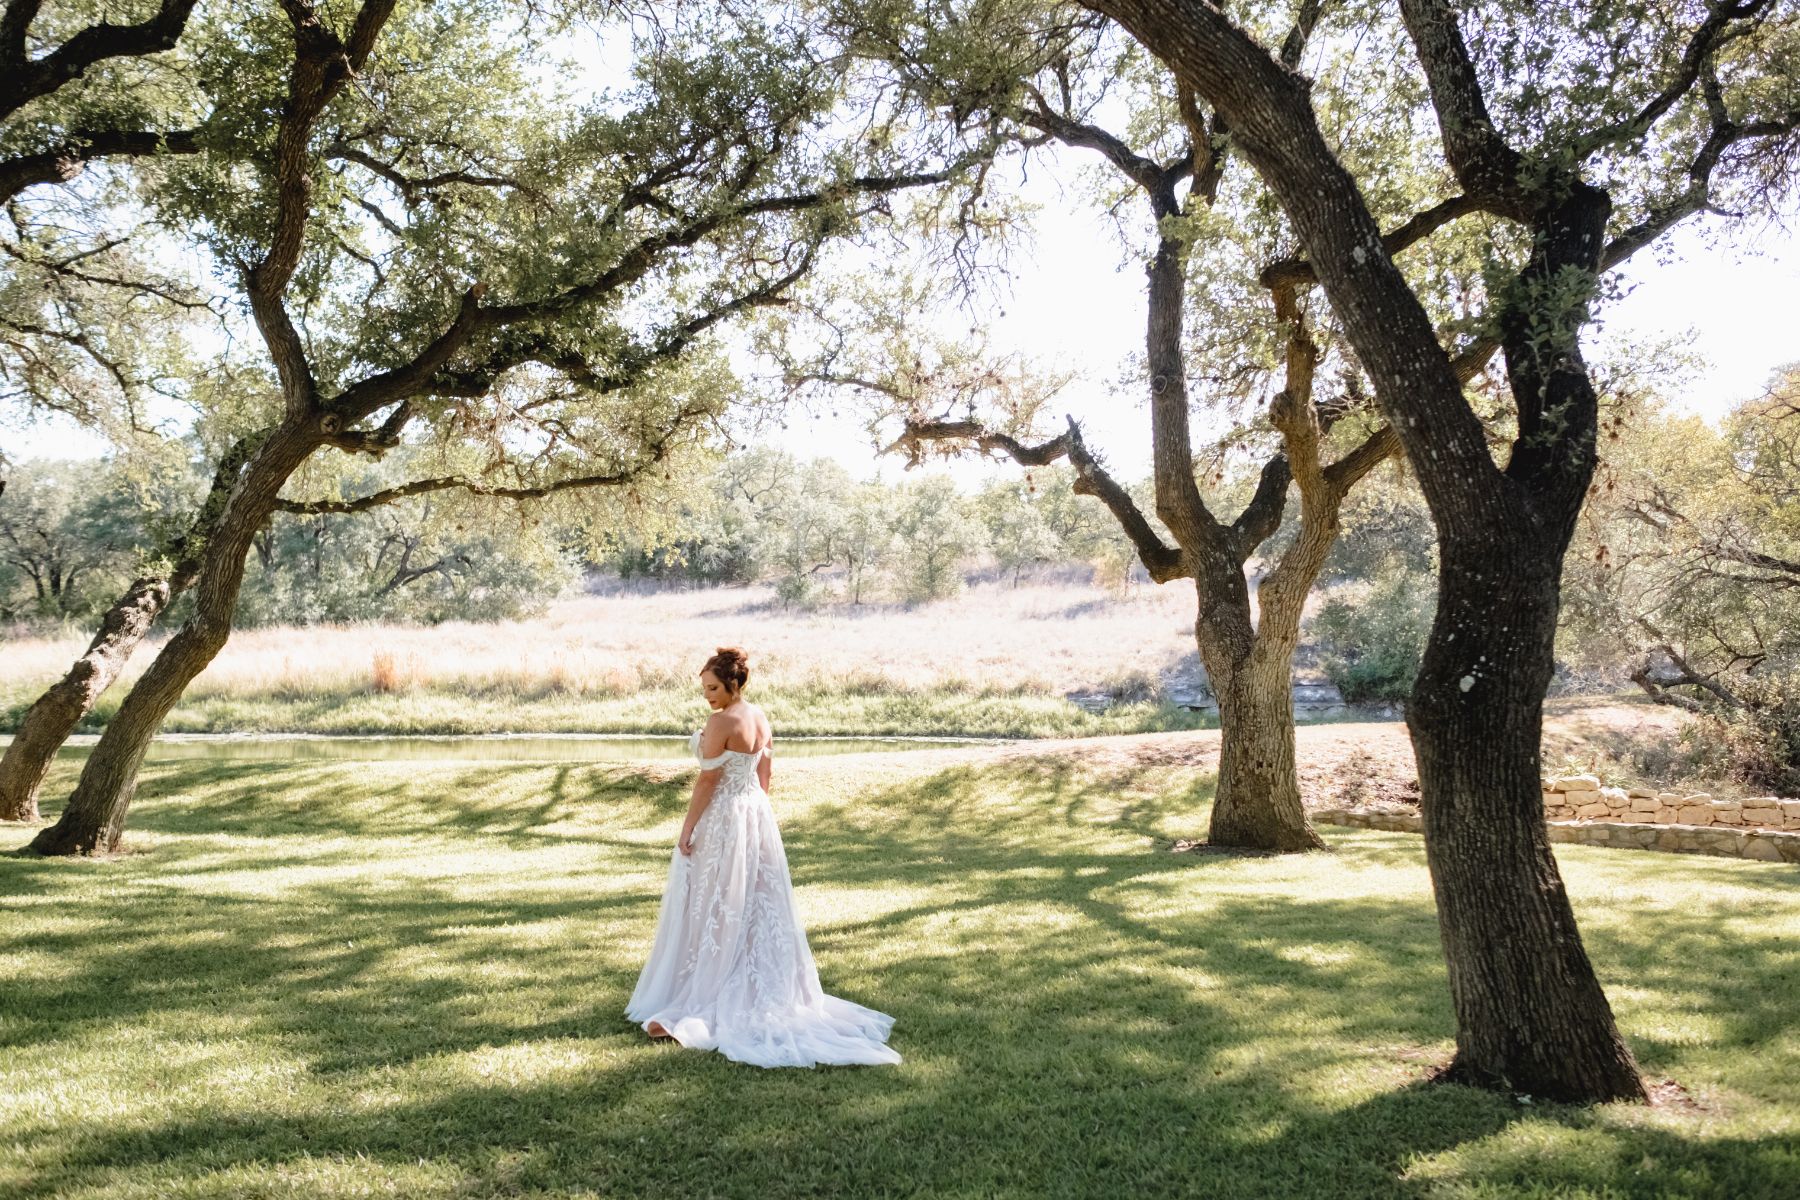 Bride walks away, looking down over her shoulder in a green lawn with large oak trees at the Addison Grove in Austin, Texas.